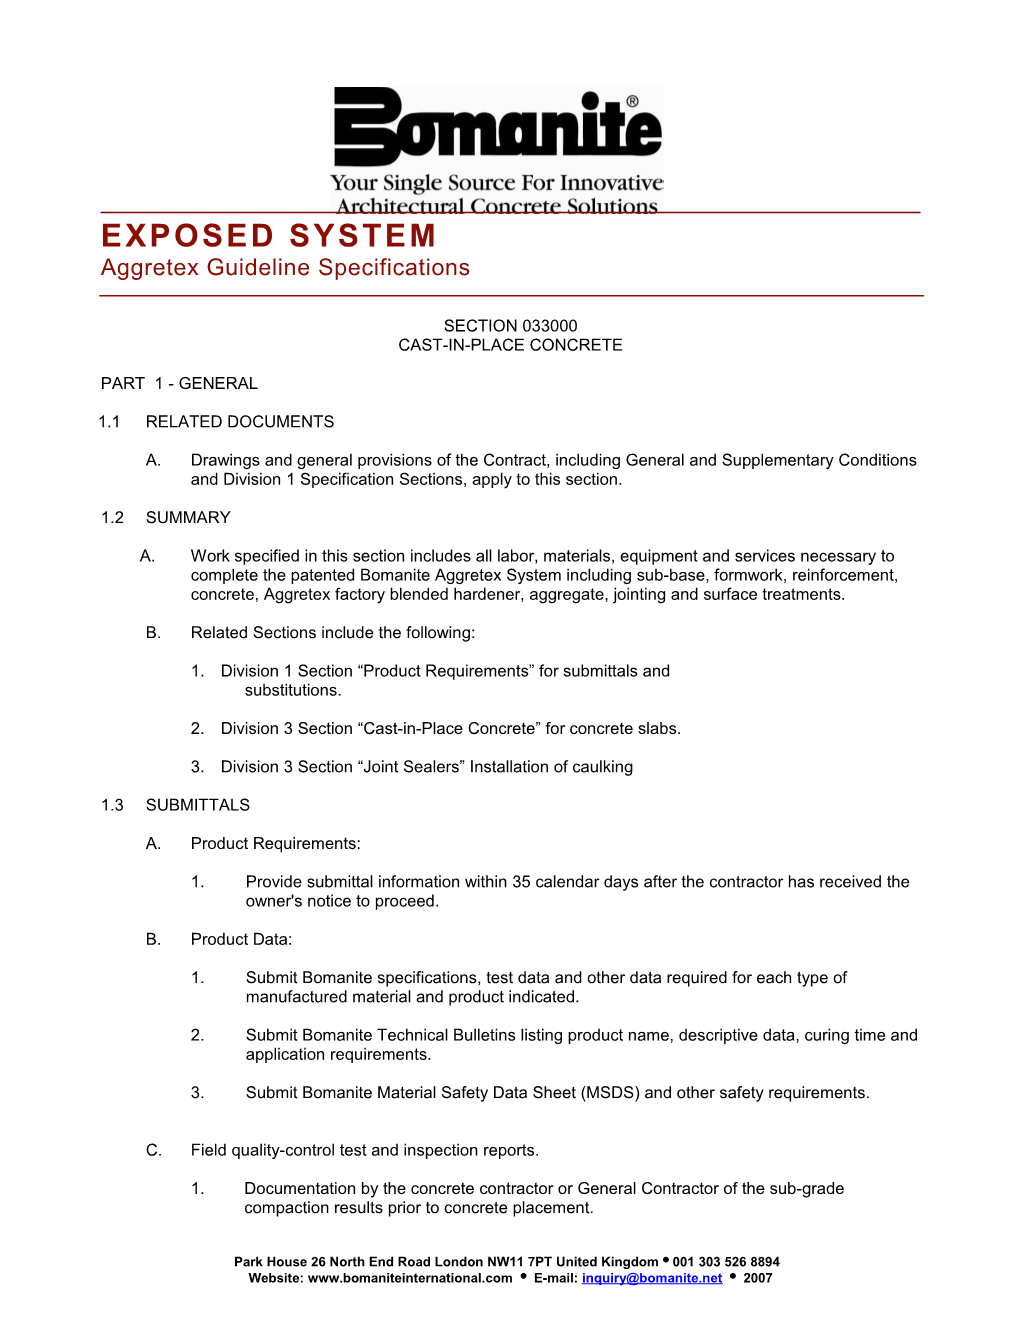 EXPOSED SYSTEM Aggretexguideline Specifications